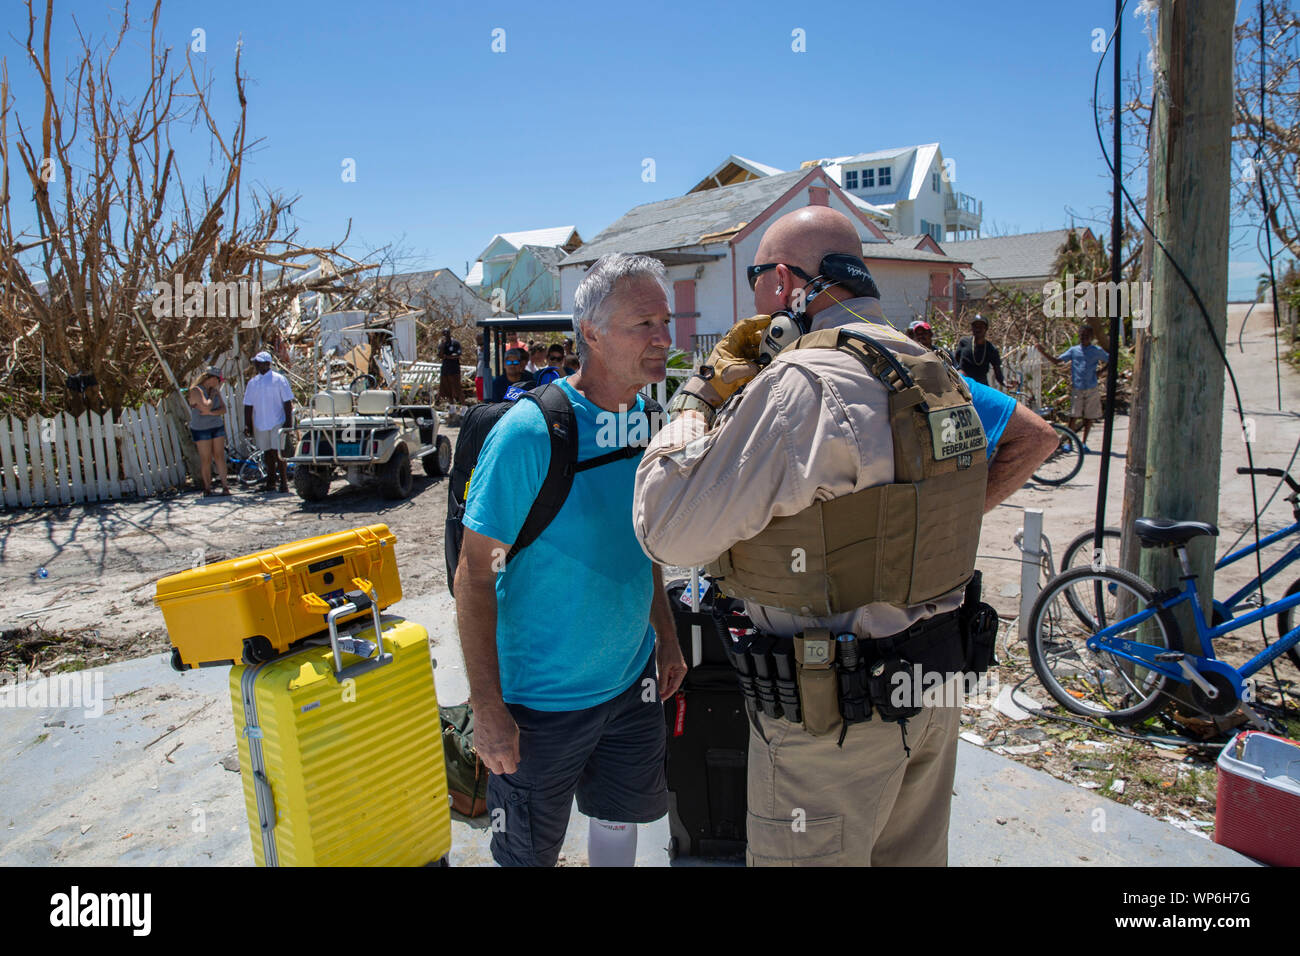 Marsh Harbour, Abaco, Bahamas. 05 September, 2019. A U.S. Customs and Border Protection officer assists a member of the search and rescue team on the ground in Hope Town in the aftermath of Hurricane Dorian September 5, 2019 in Marsh Harbour, Abaco, Bahamas. Dorian struck the small island nation as a Category 5 storm with winds of 185 mph. Stock Photo